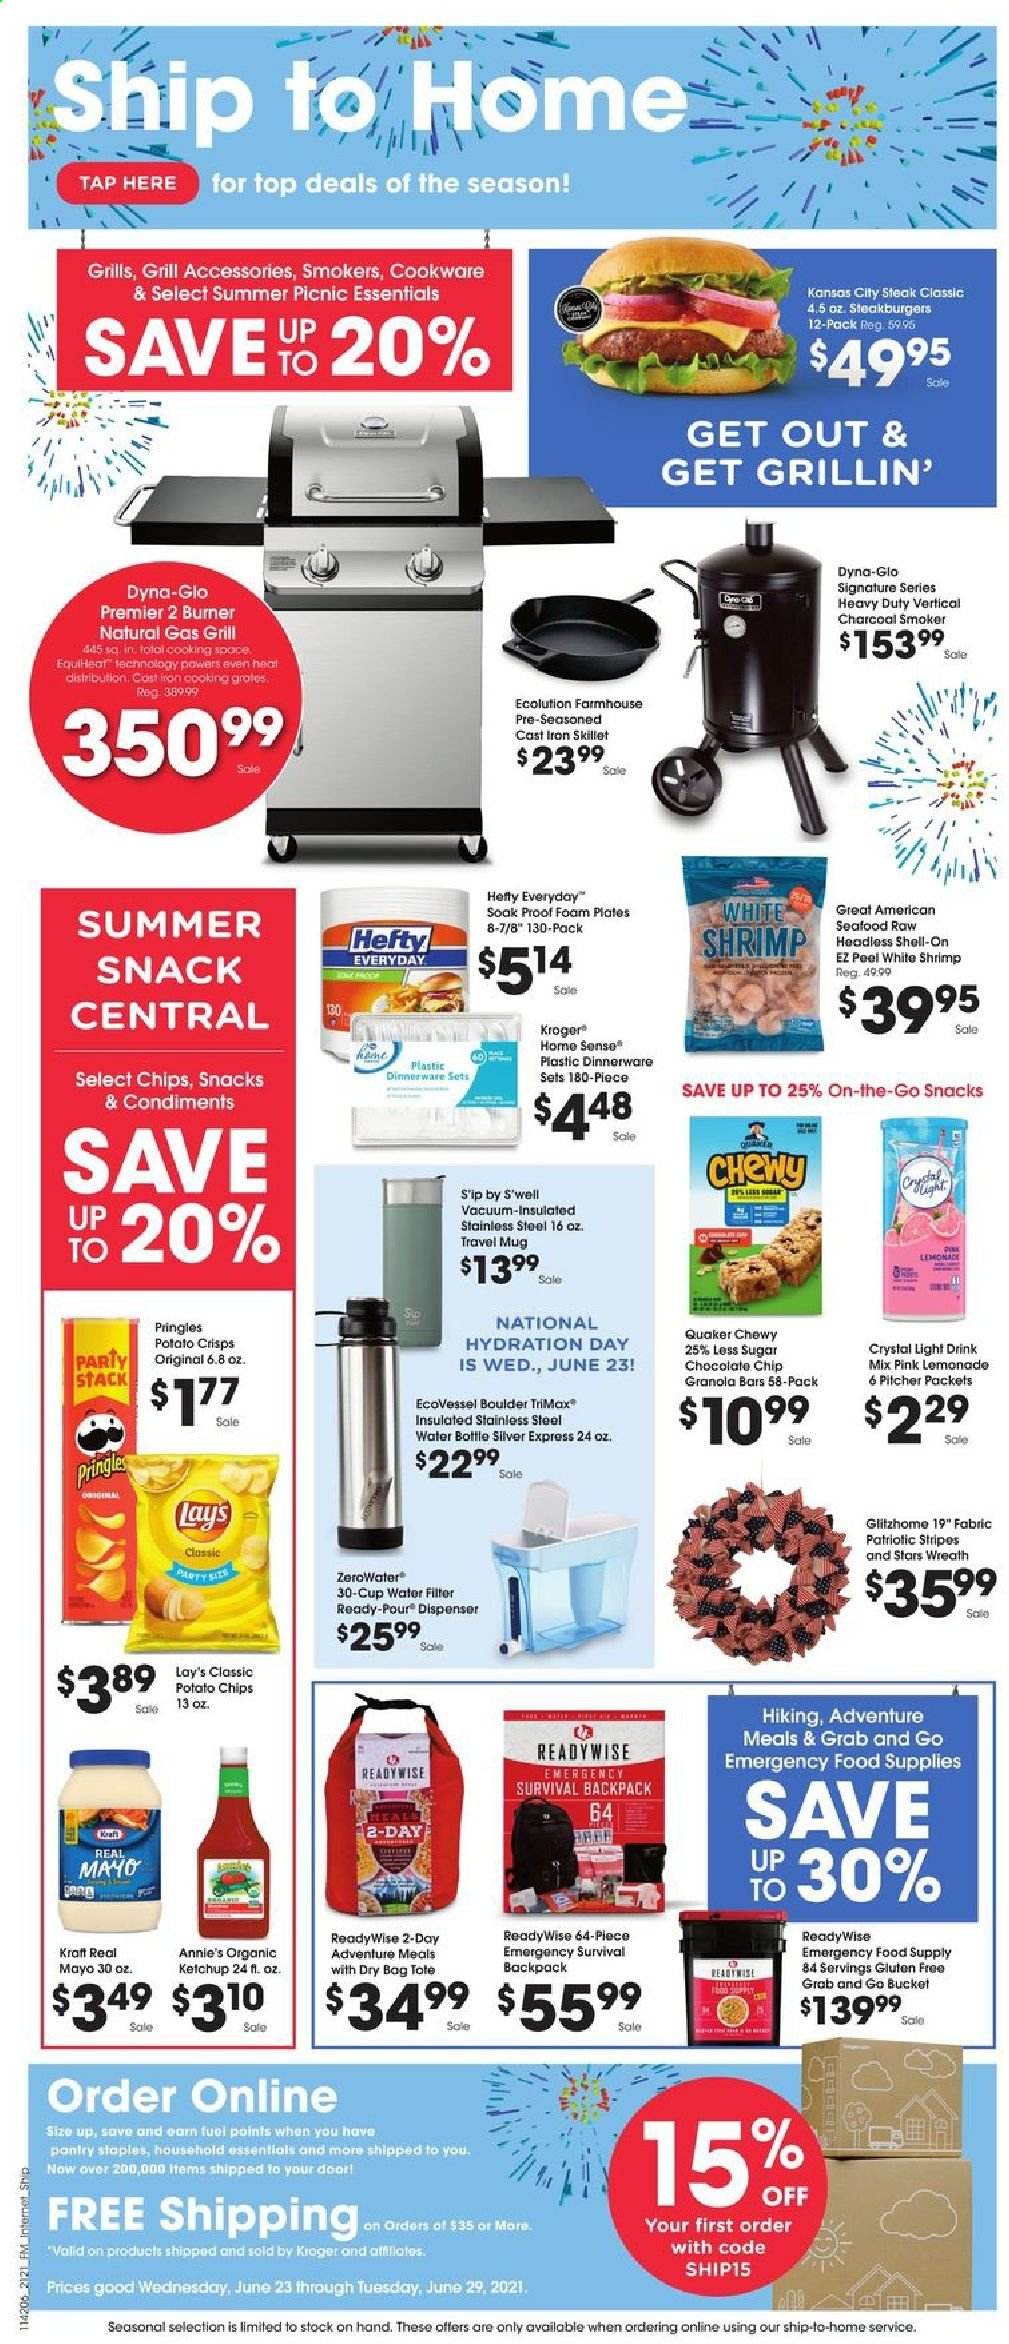 thumbnail - King Soopers Flyer - 06/23/2021 - 06/29/2021 - Sales products - stool, wreath, seafood, shrimps, Quaker, Annie's, Kraft®, mayonnaise, snack, potato crisps, potato chips, Pringles, chips, Lay’s, granola bar, ketchup, lemonade, steak, Hefty, dispenser, cookware set, dinnerware set, mug, pitcher, cup, travel mug, drink bottle, foam plates, water filter, backpack, charcoal, gas grill, grill, smoker, charcoal smoker. Page 1.